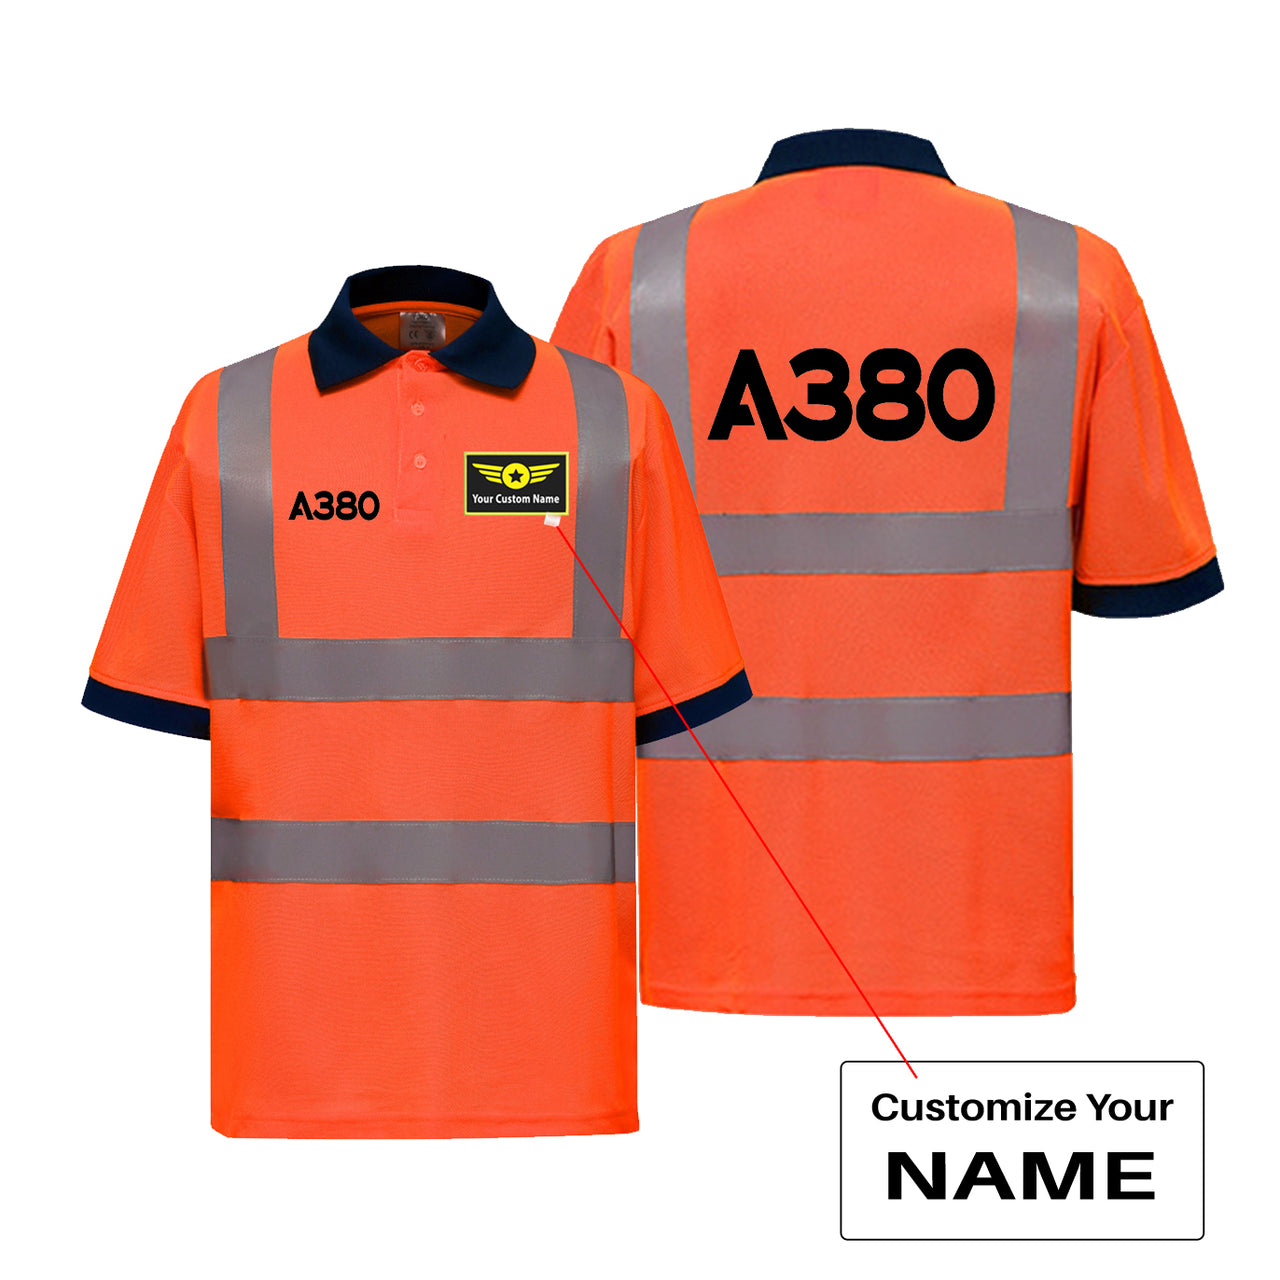 A380 Flat Text Designed Reflective Polo T-Shirts